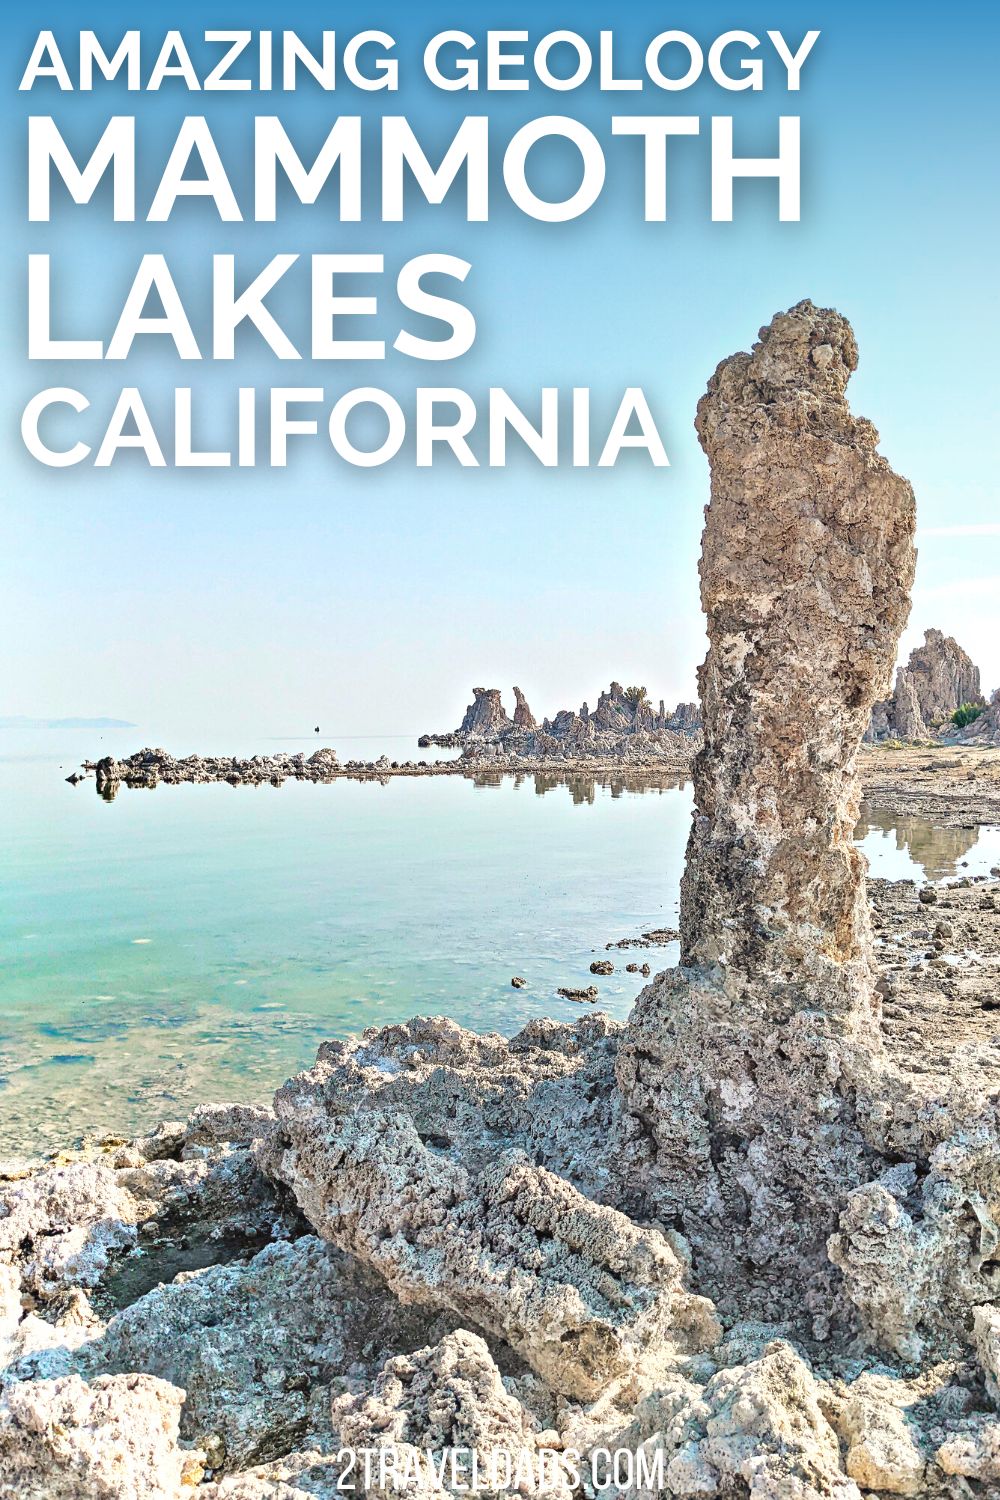 Mammoth Lakes, California has so much cool geology to experience. From hot springs to bizarre petrified springs, you'll be amazed and what you'll find just outside Yosemite.